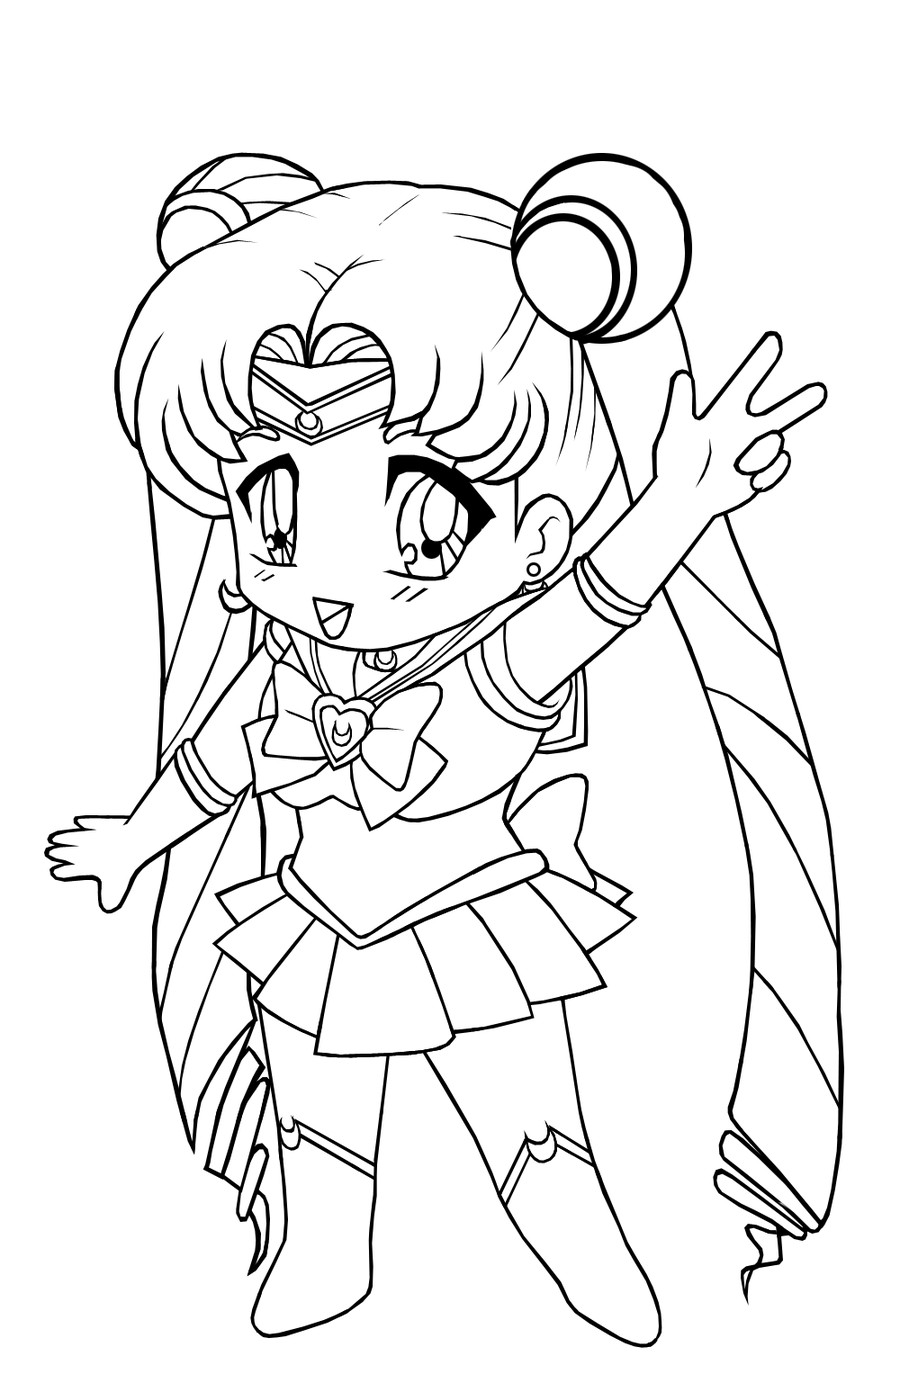 Sailor Moon Coloring Pages Printable
 Silor Moon Coloring Pagrs